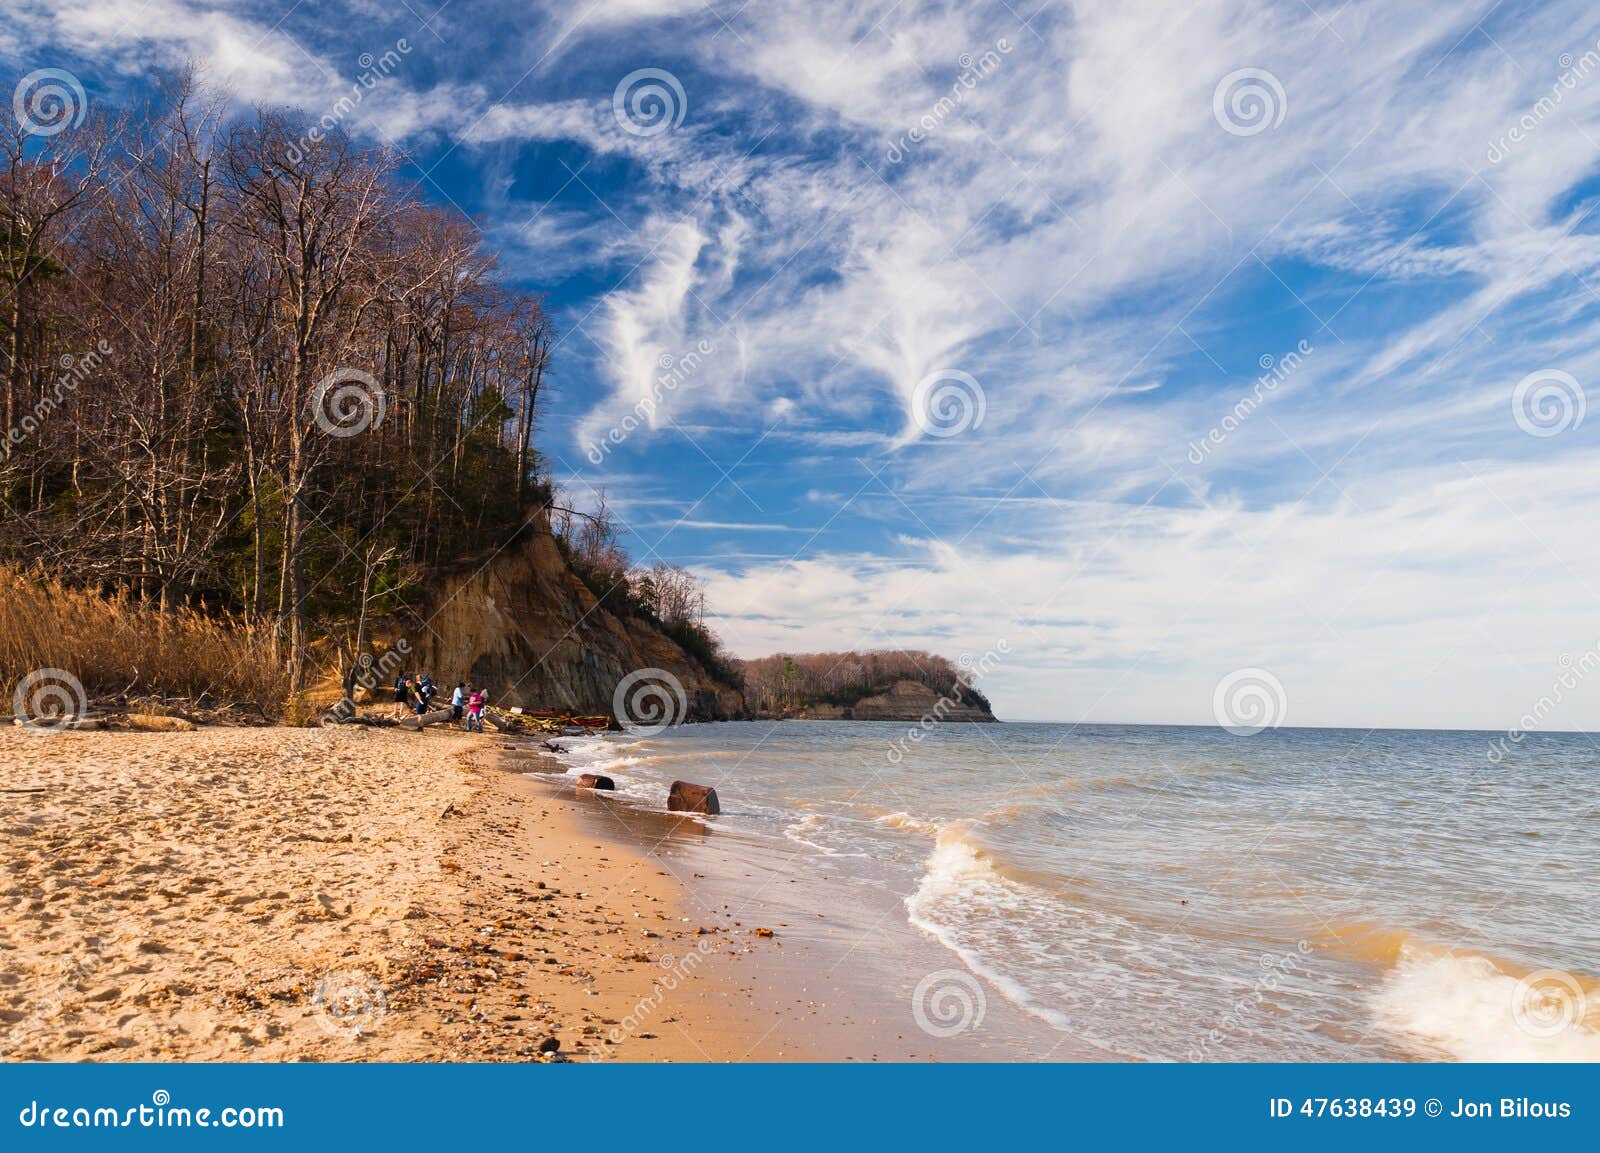 beach and cliffs on the chesapeake bay